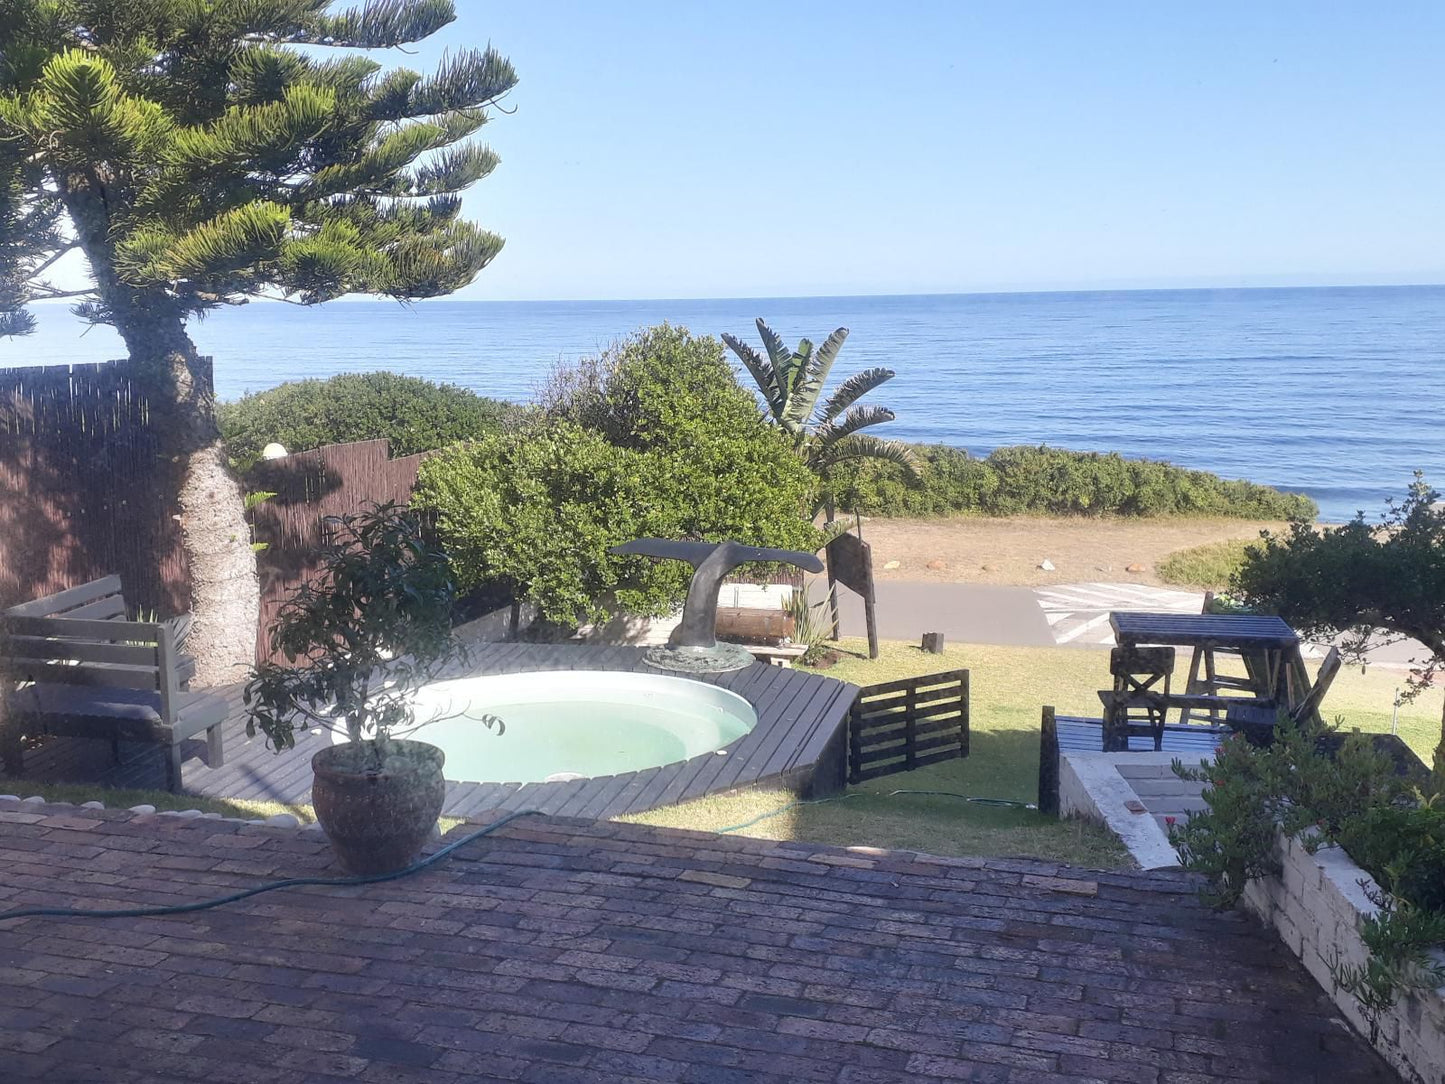 Whales Way Ocean Retreat Bandb Wilderness Western Cape South Africa Beach, Nature, Sand, Palm Tree, Plant, Wood, Swimming Pool